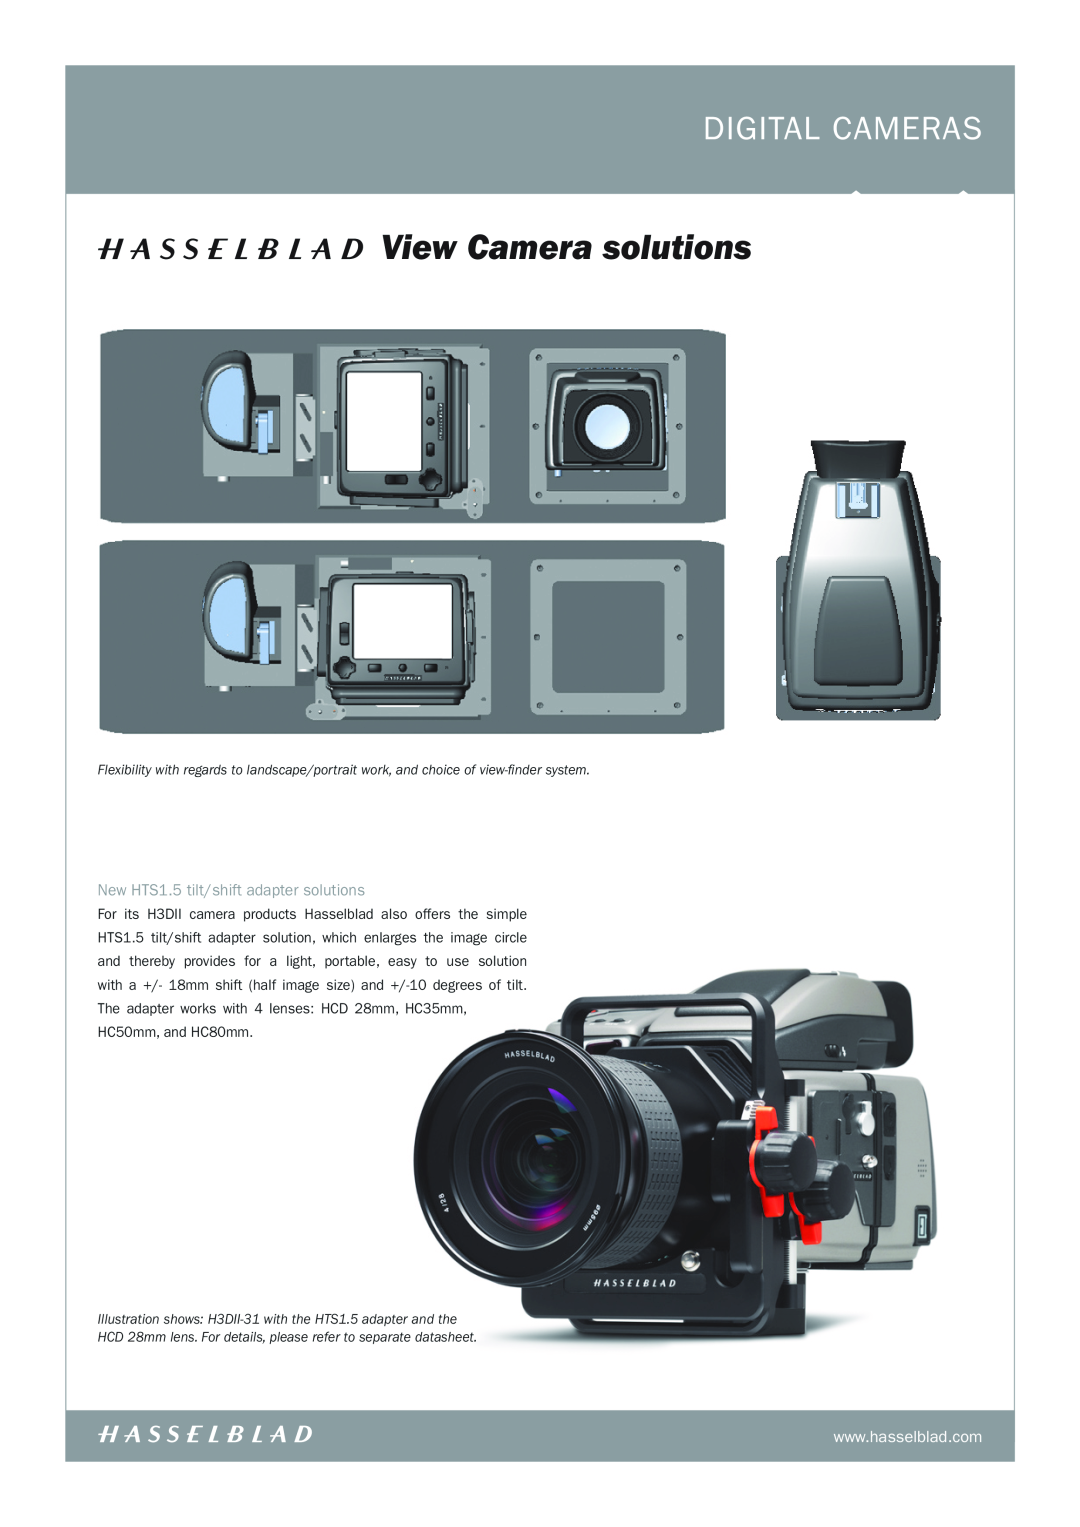 Hasselblad 503CWD, H3DII, H3dii-MS, CF-MS New HTS1.5 tilt/shift adapter solutions, View Camera solutions, digital CAMERAS 